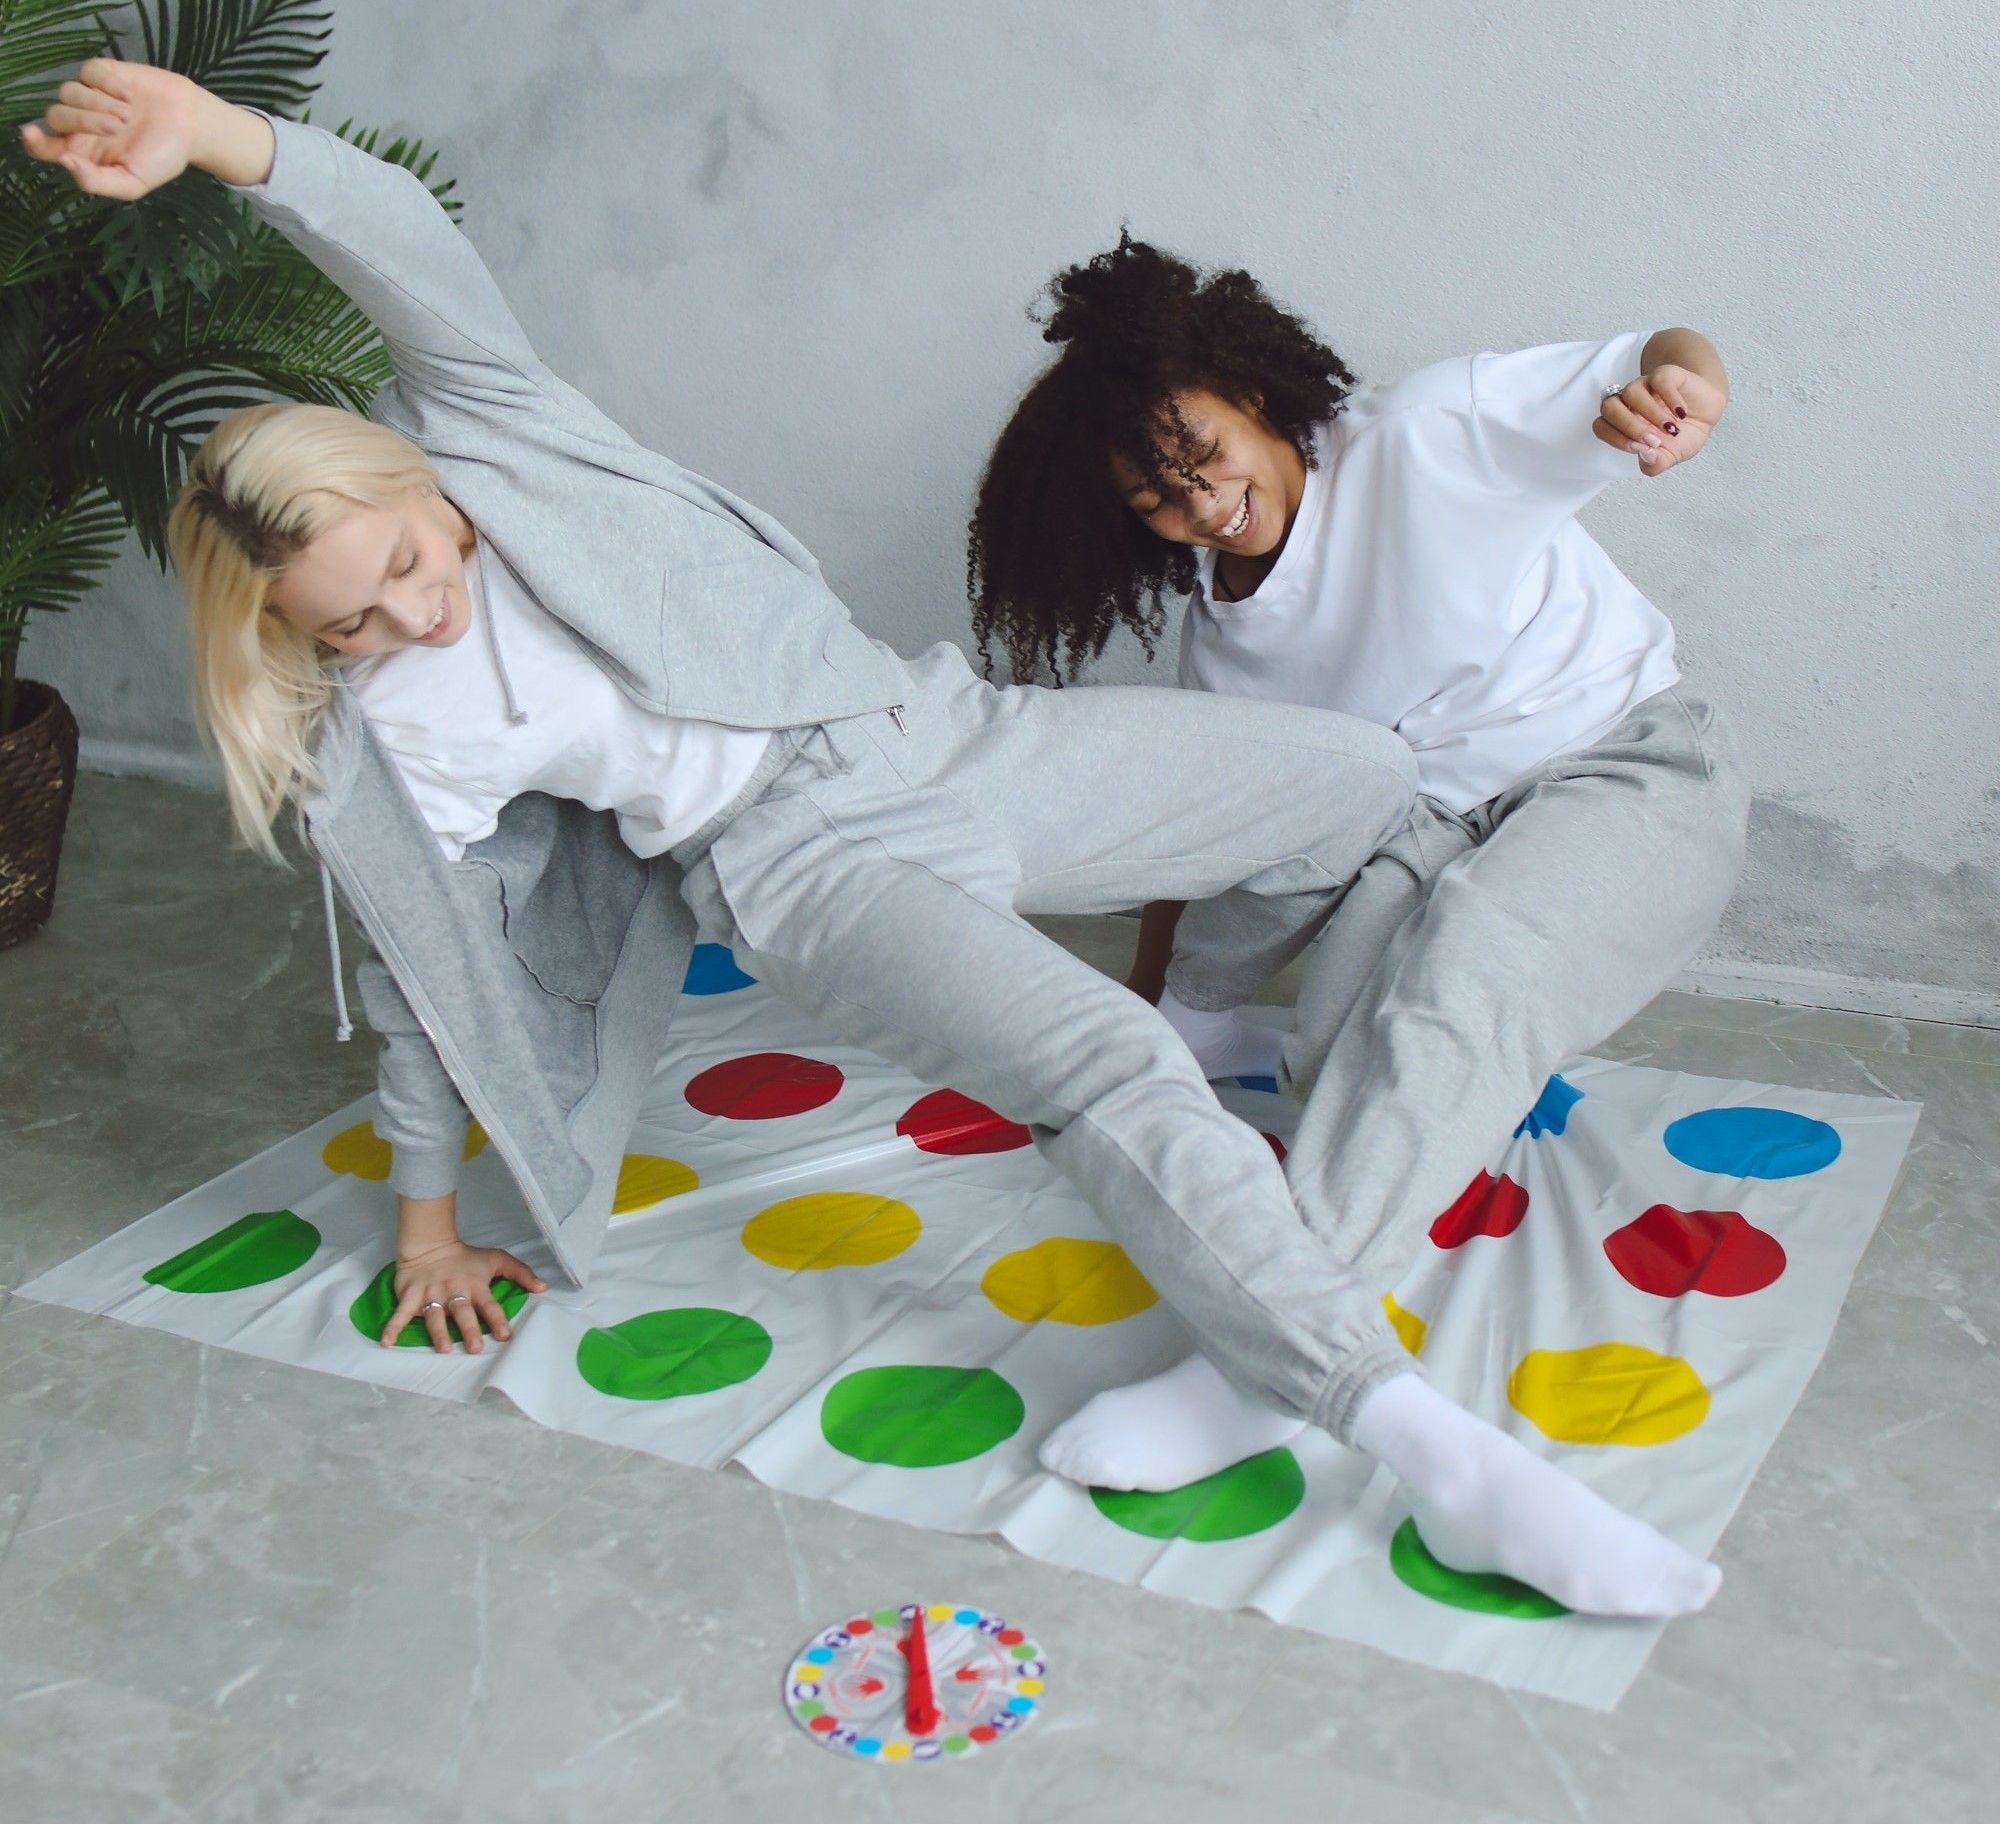 Playing twister